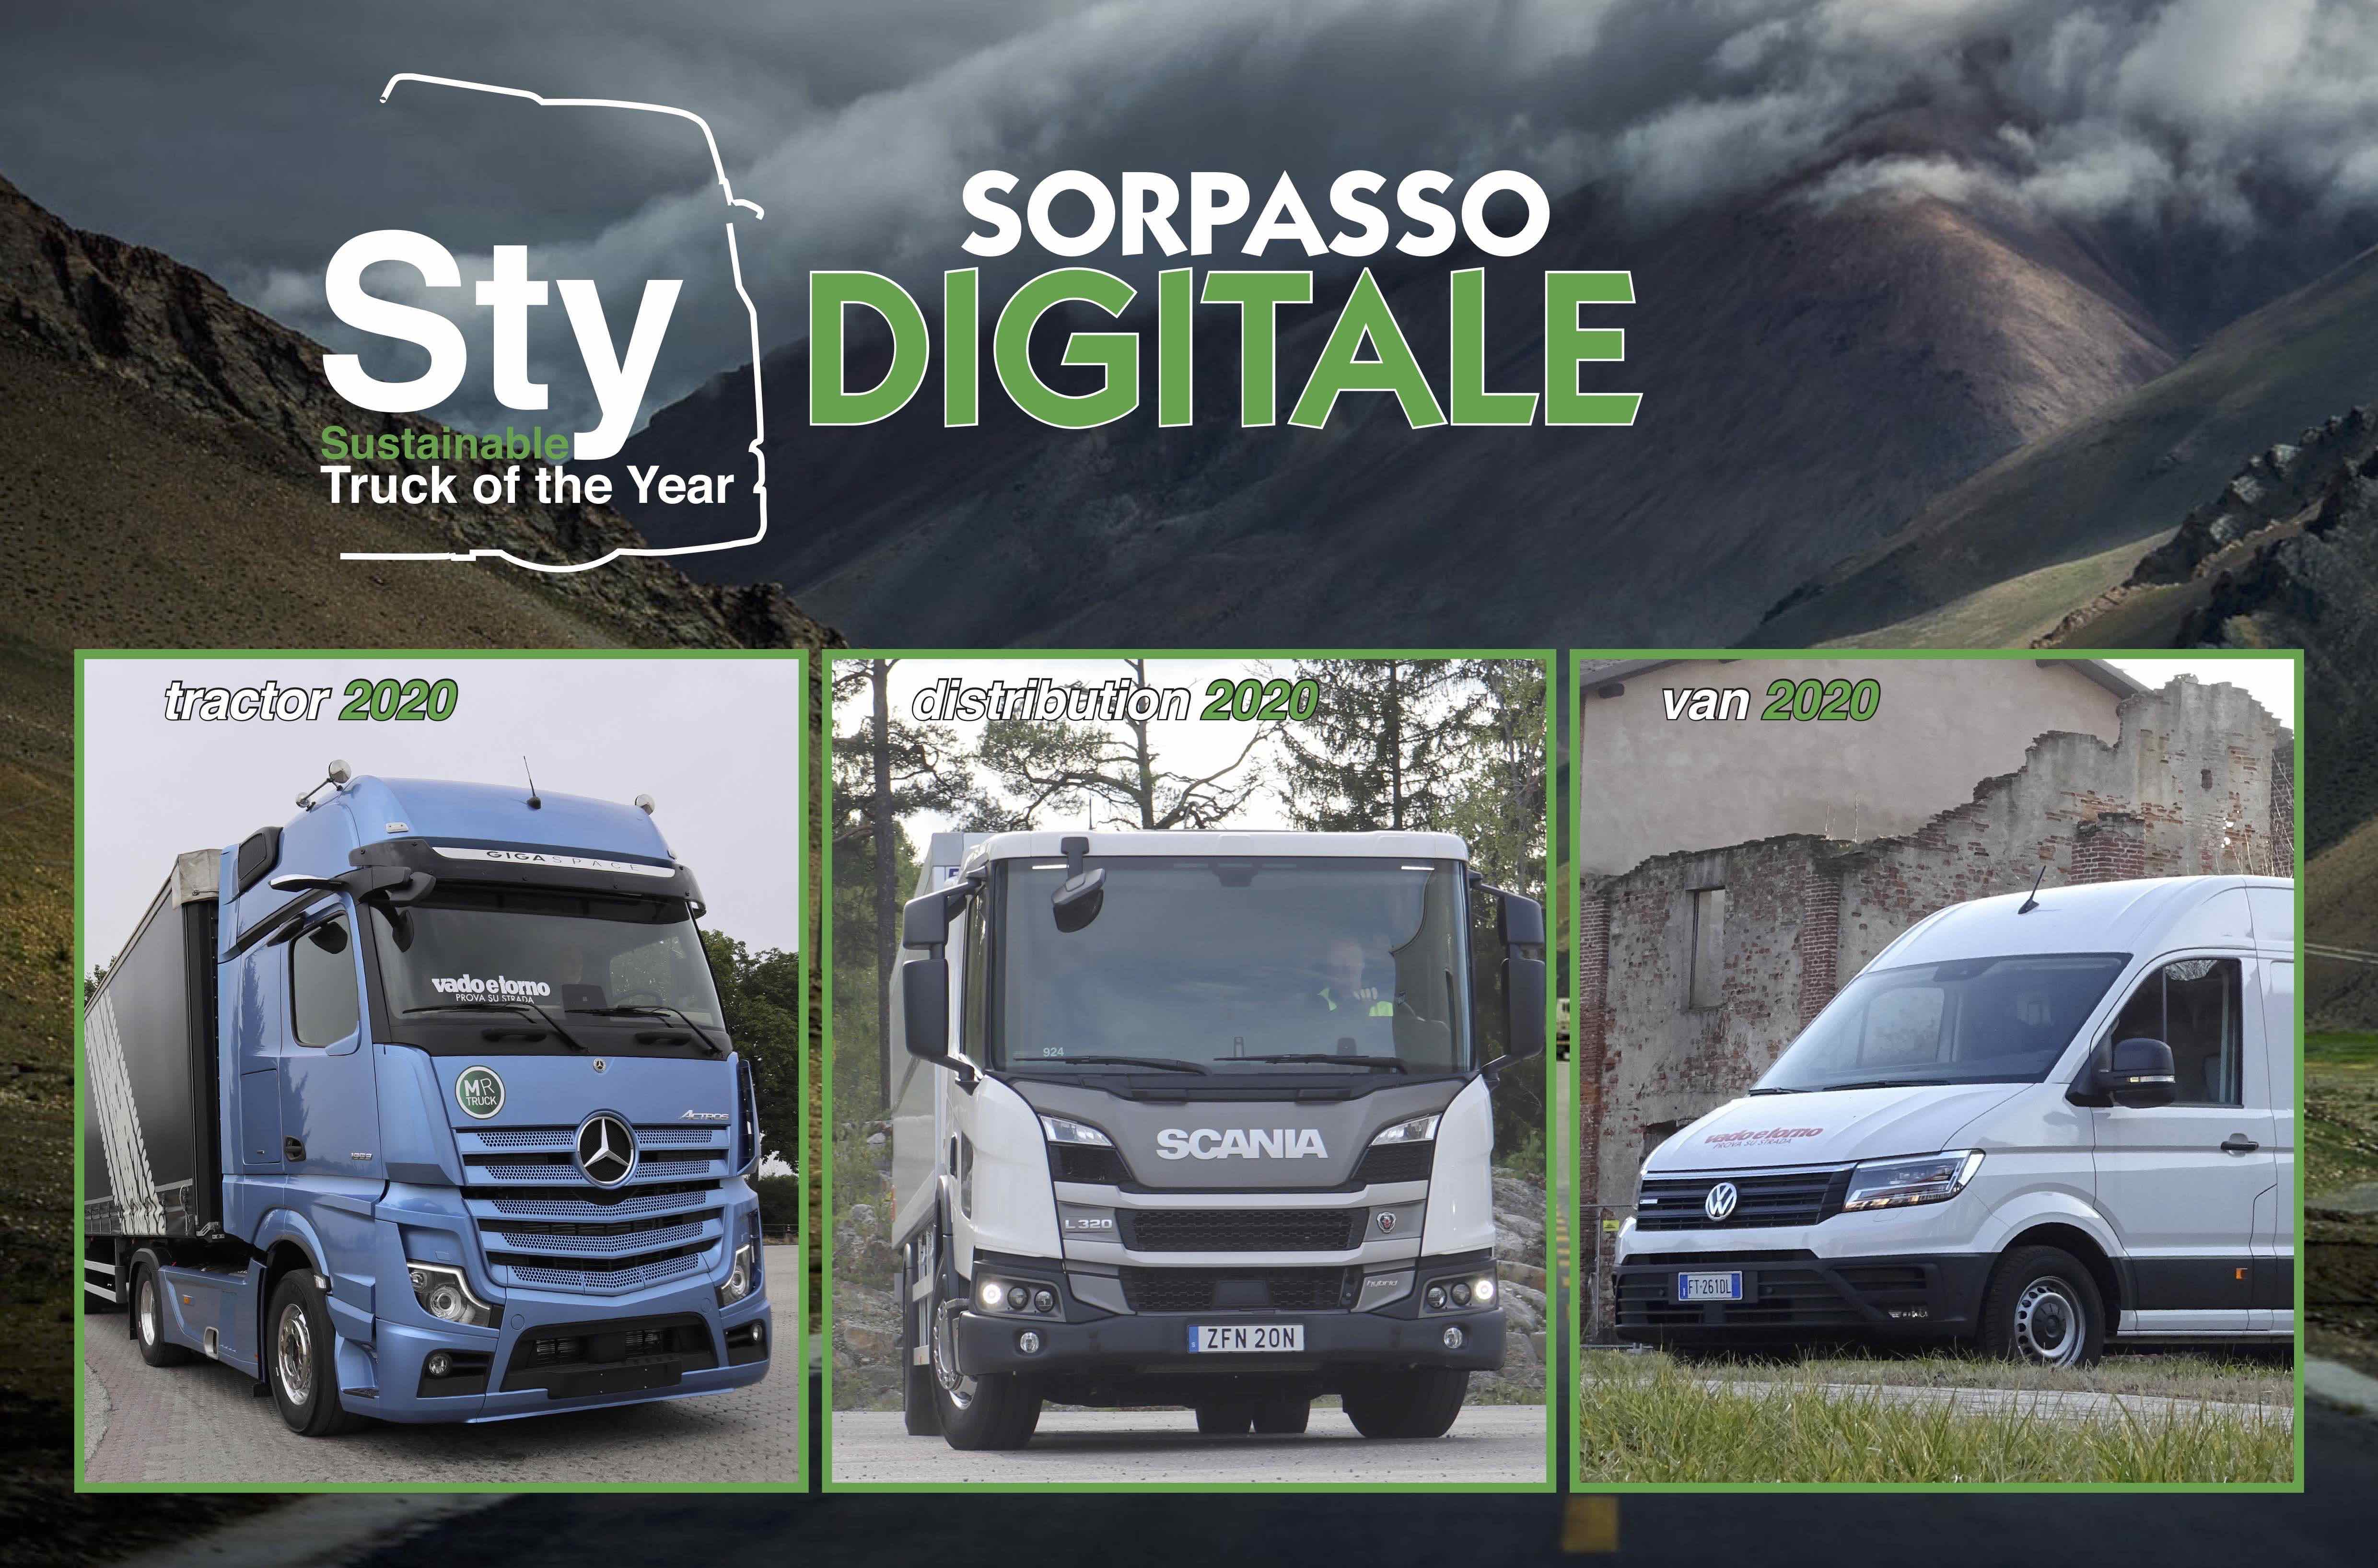 Sustainable Truck of the Year 2020, sorpasso digitale